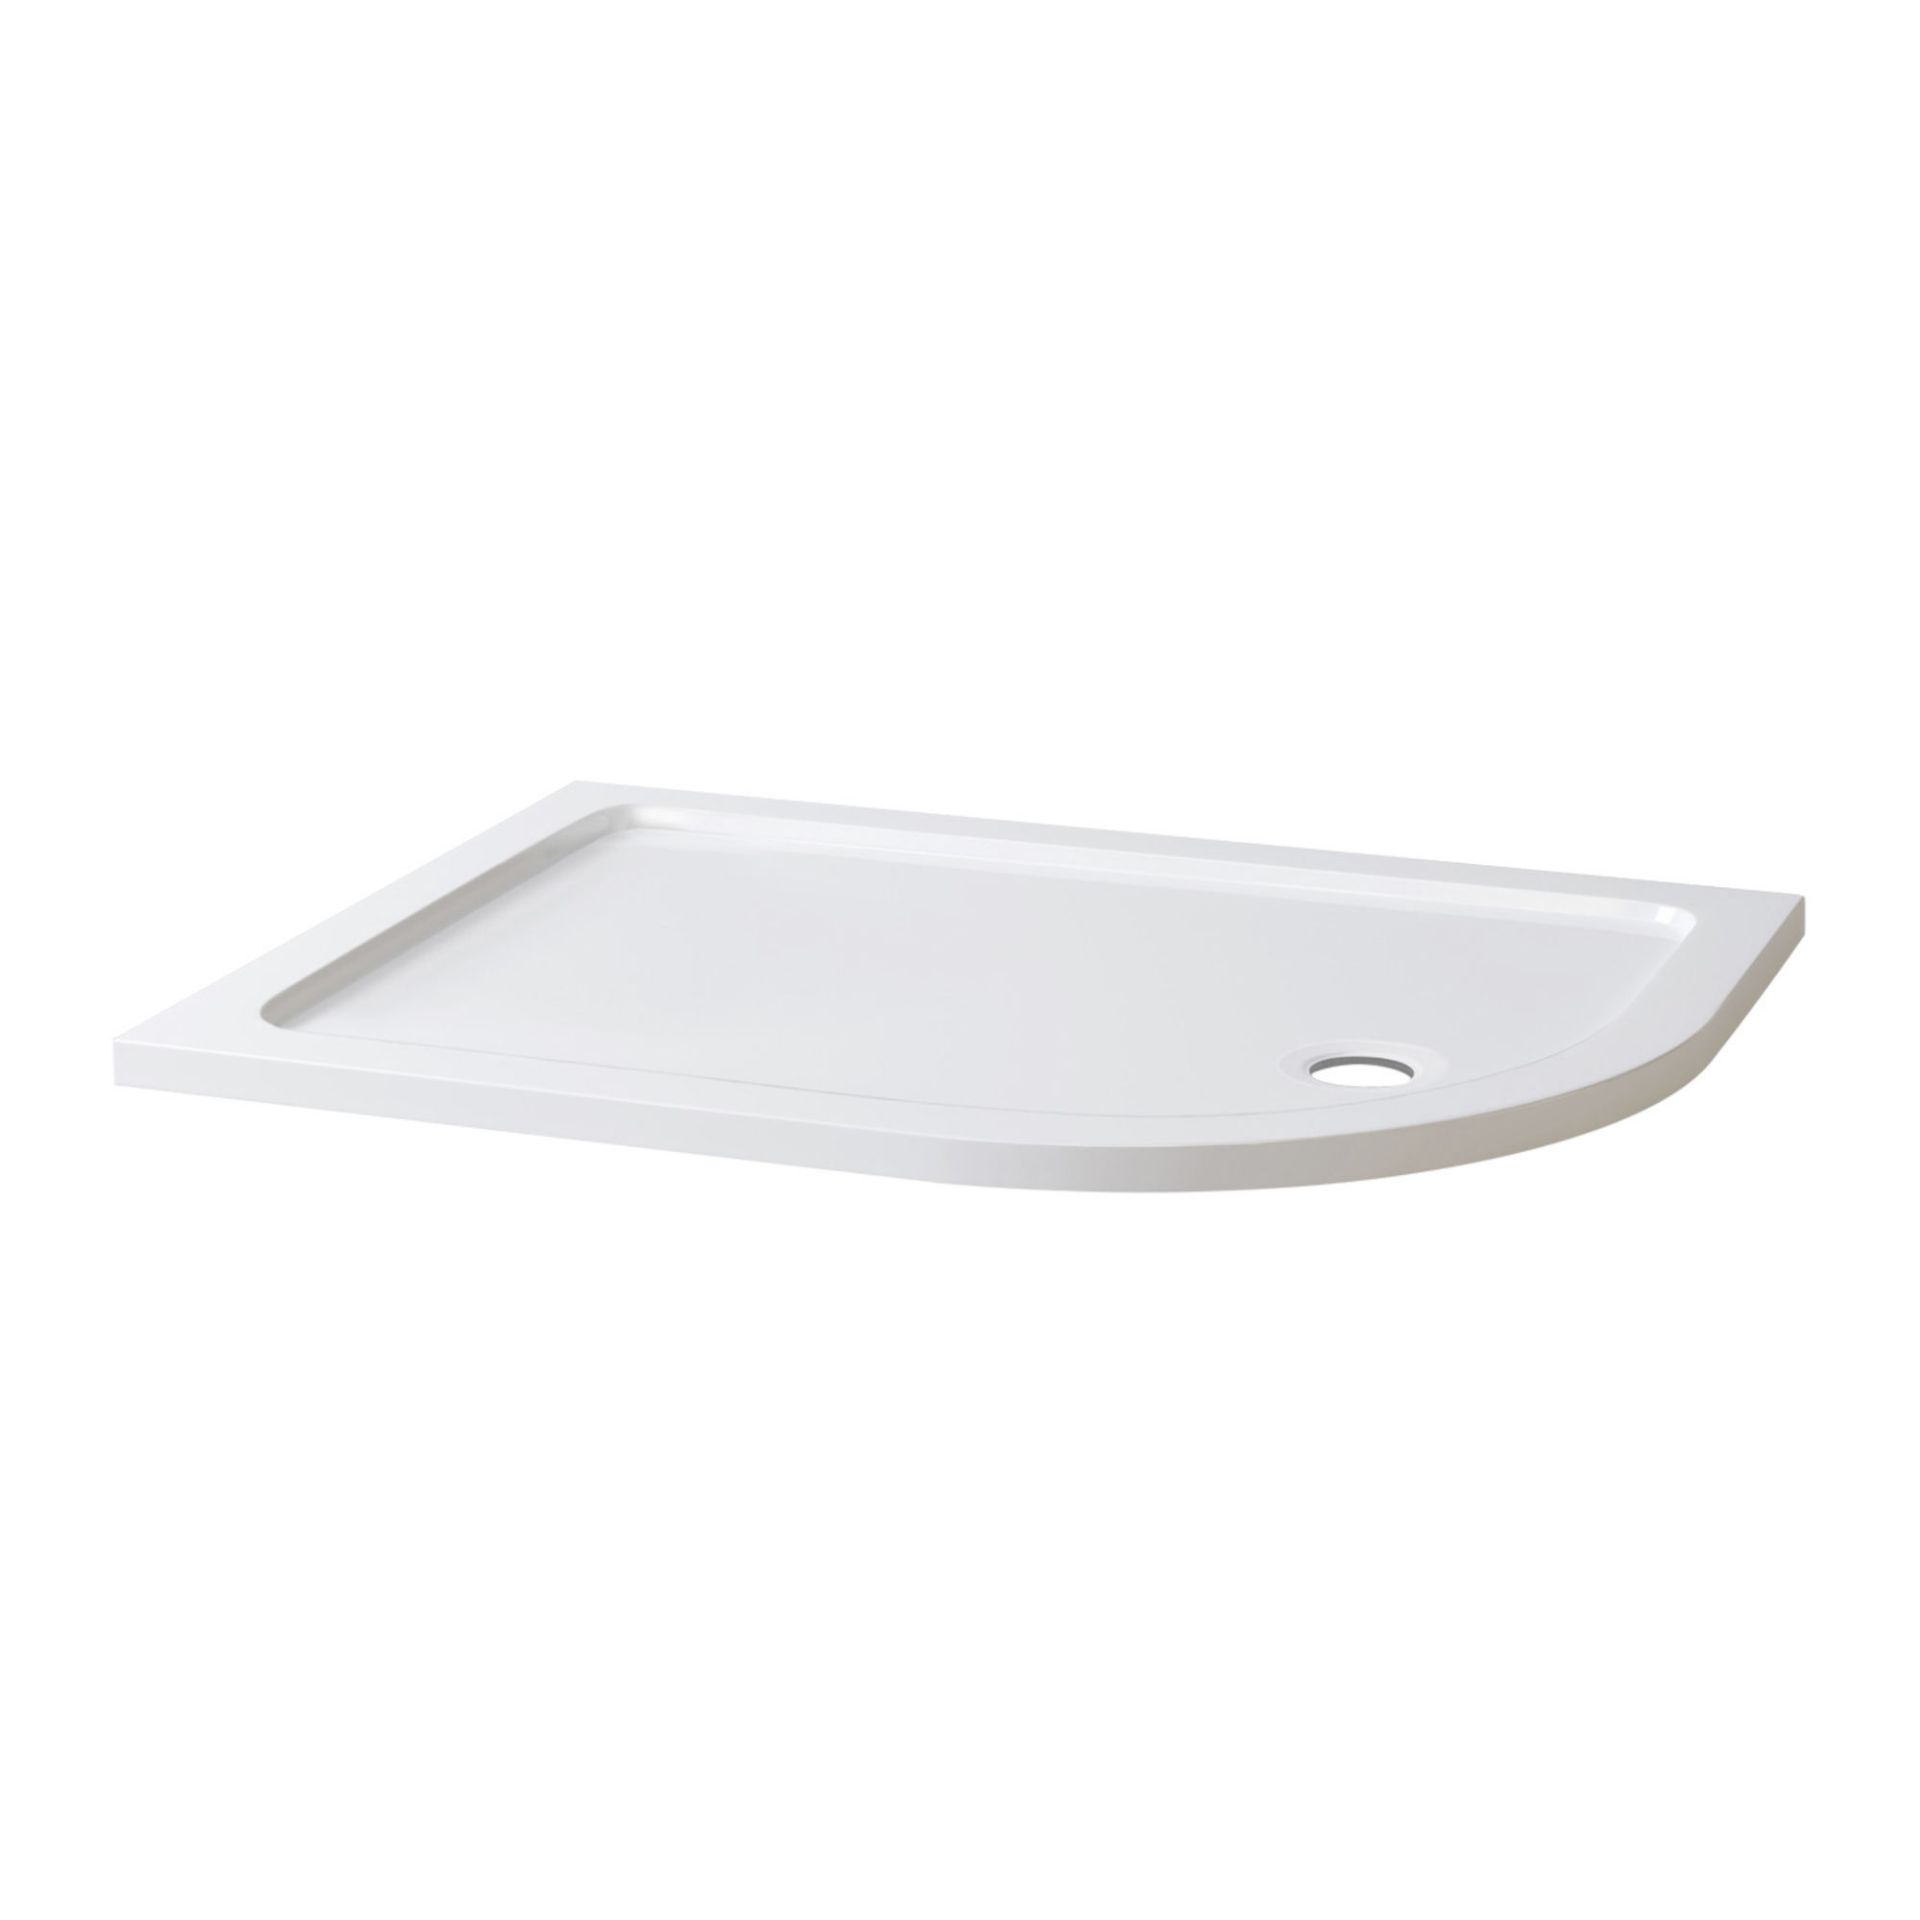 (AD54) 1200x900mm Offset Quadrant Ultra Slim Stone Shower Tray - Right. RRP £234.99. Low profile - Image 4 of 4